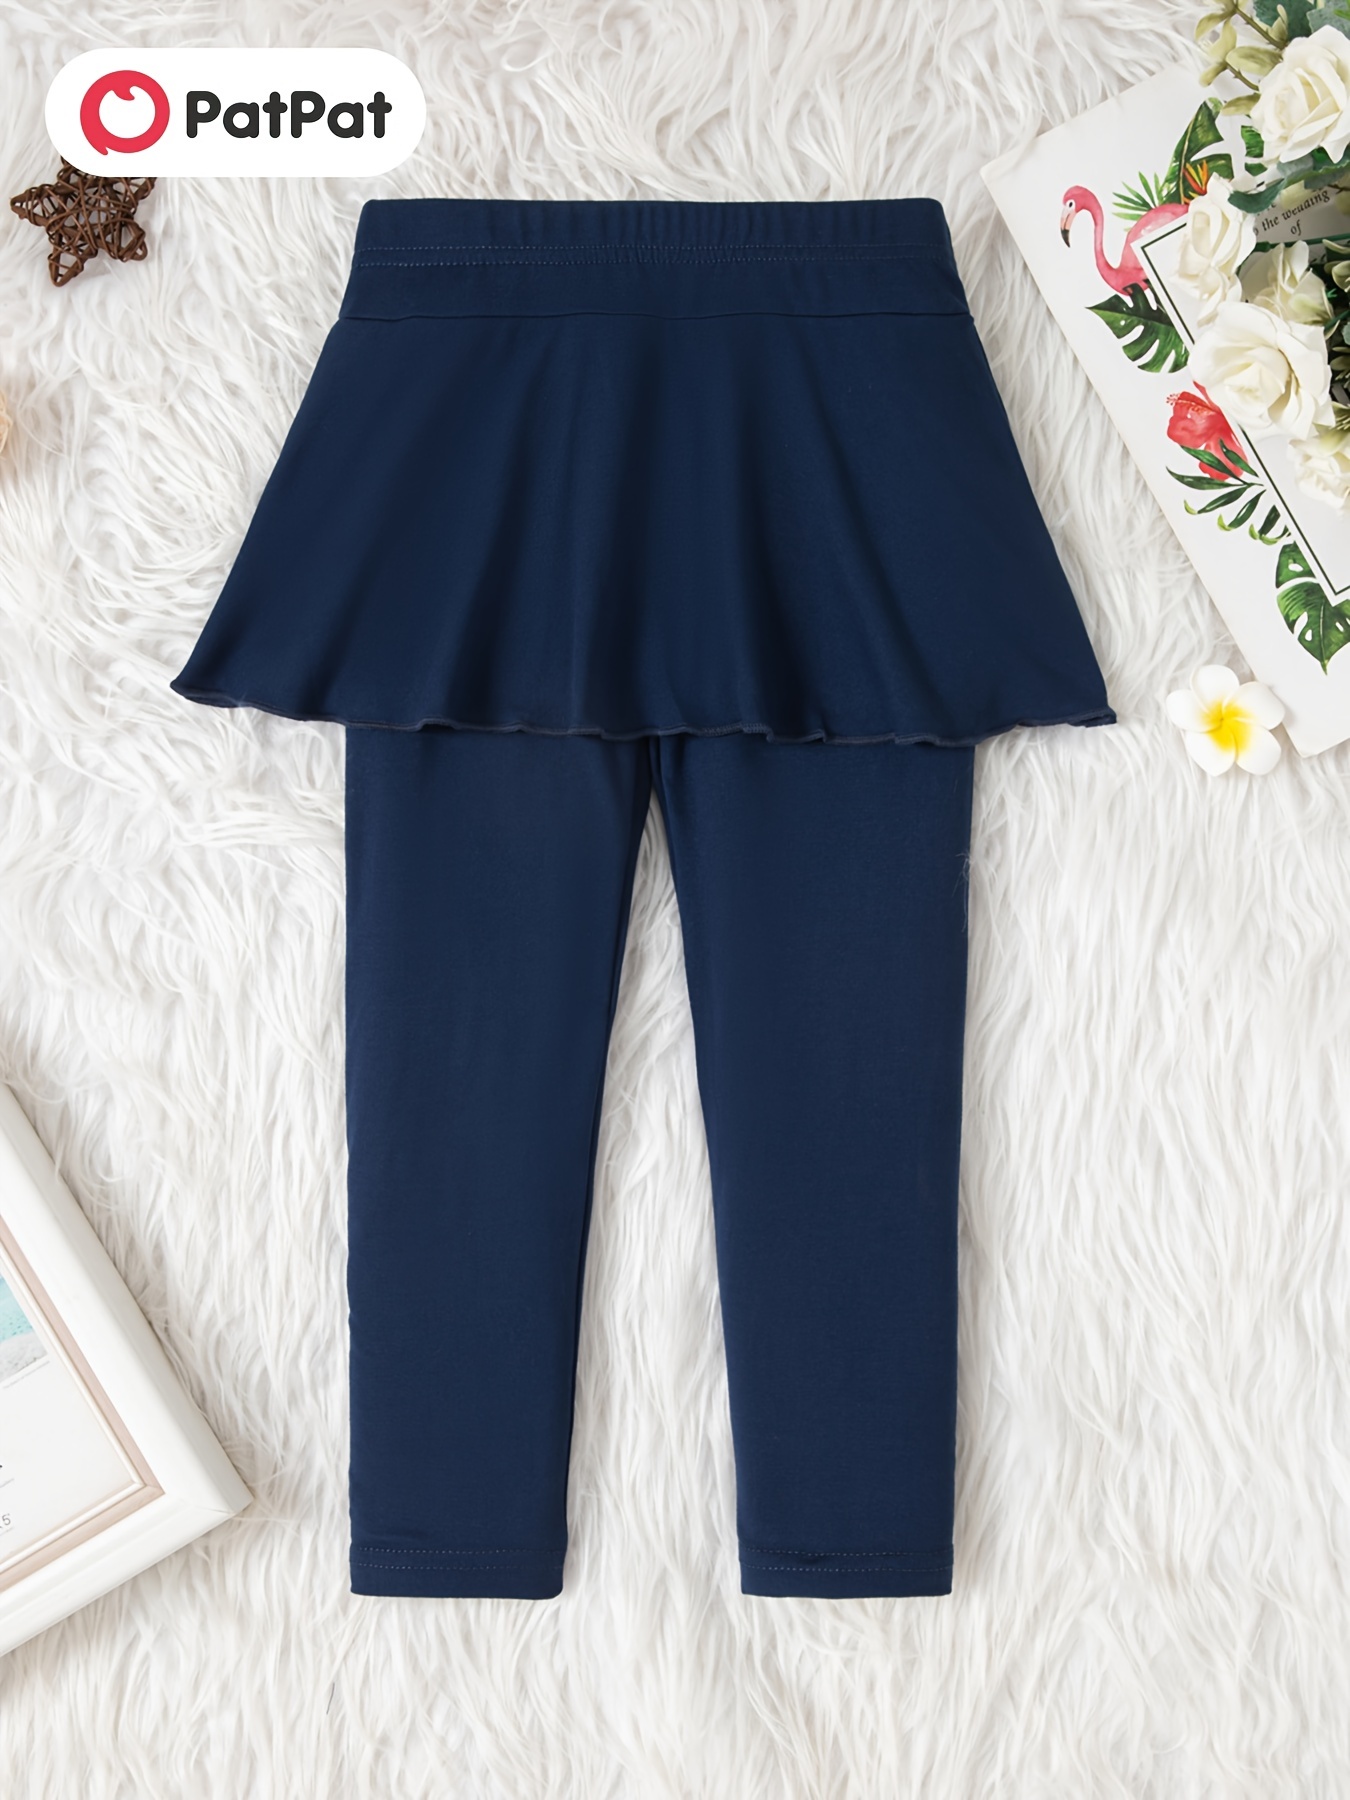 Skirted Leggings For Girls Stylish Long Trousers For Teens And Kids 4 14  Years LJ201019 From Jiao08, $10.91